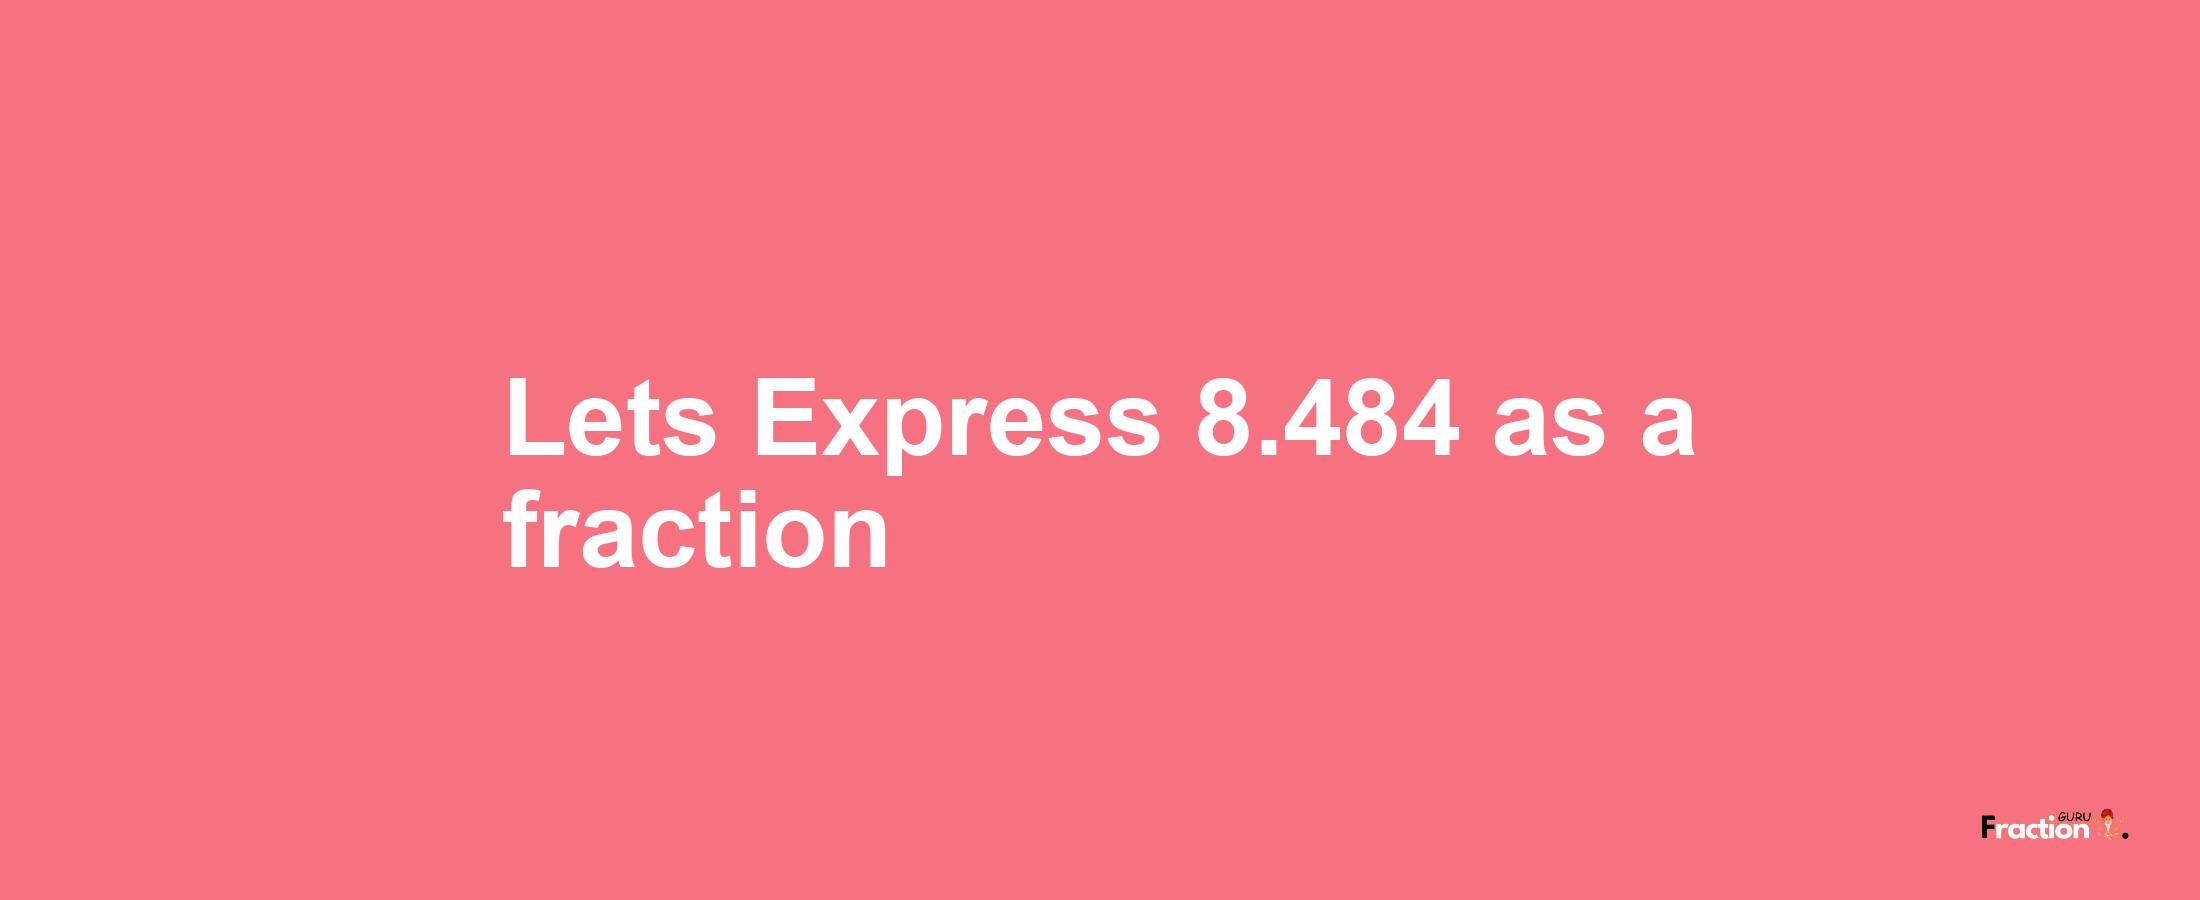 Lets Express 8.484 as afraction